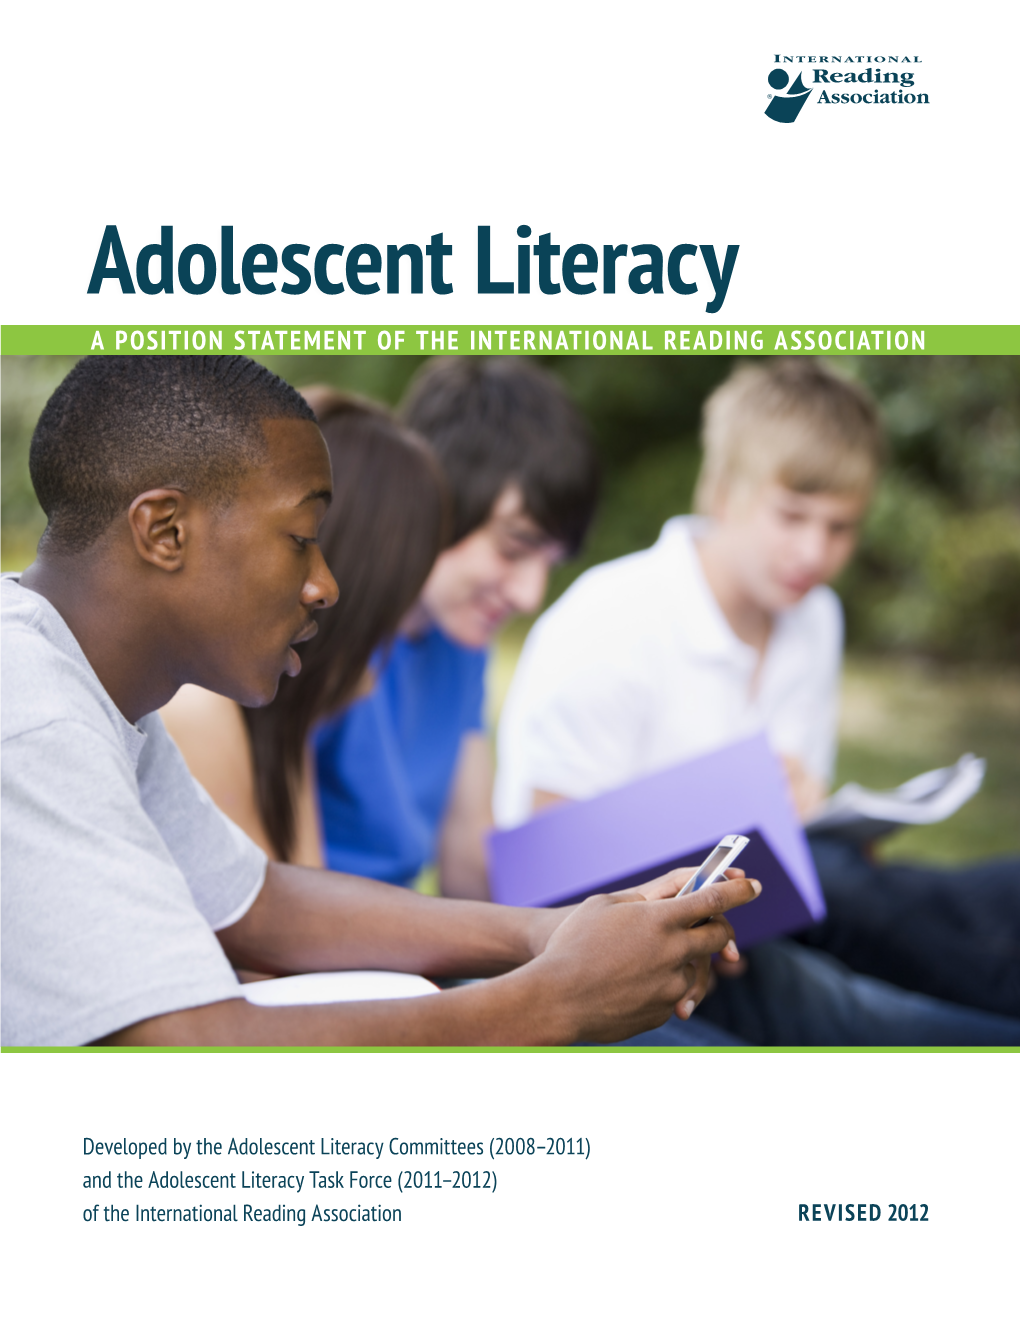 Adolescent Literacy a POSITION STATEMENT of the INTERNATIONAL READING ASSOCIATION